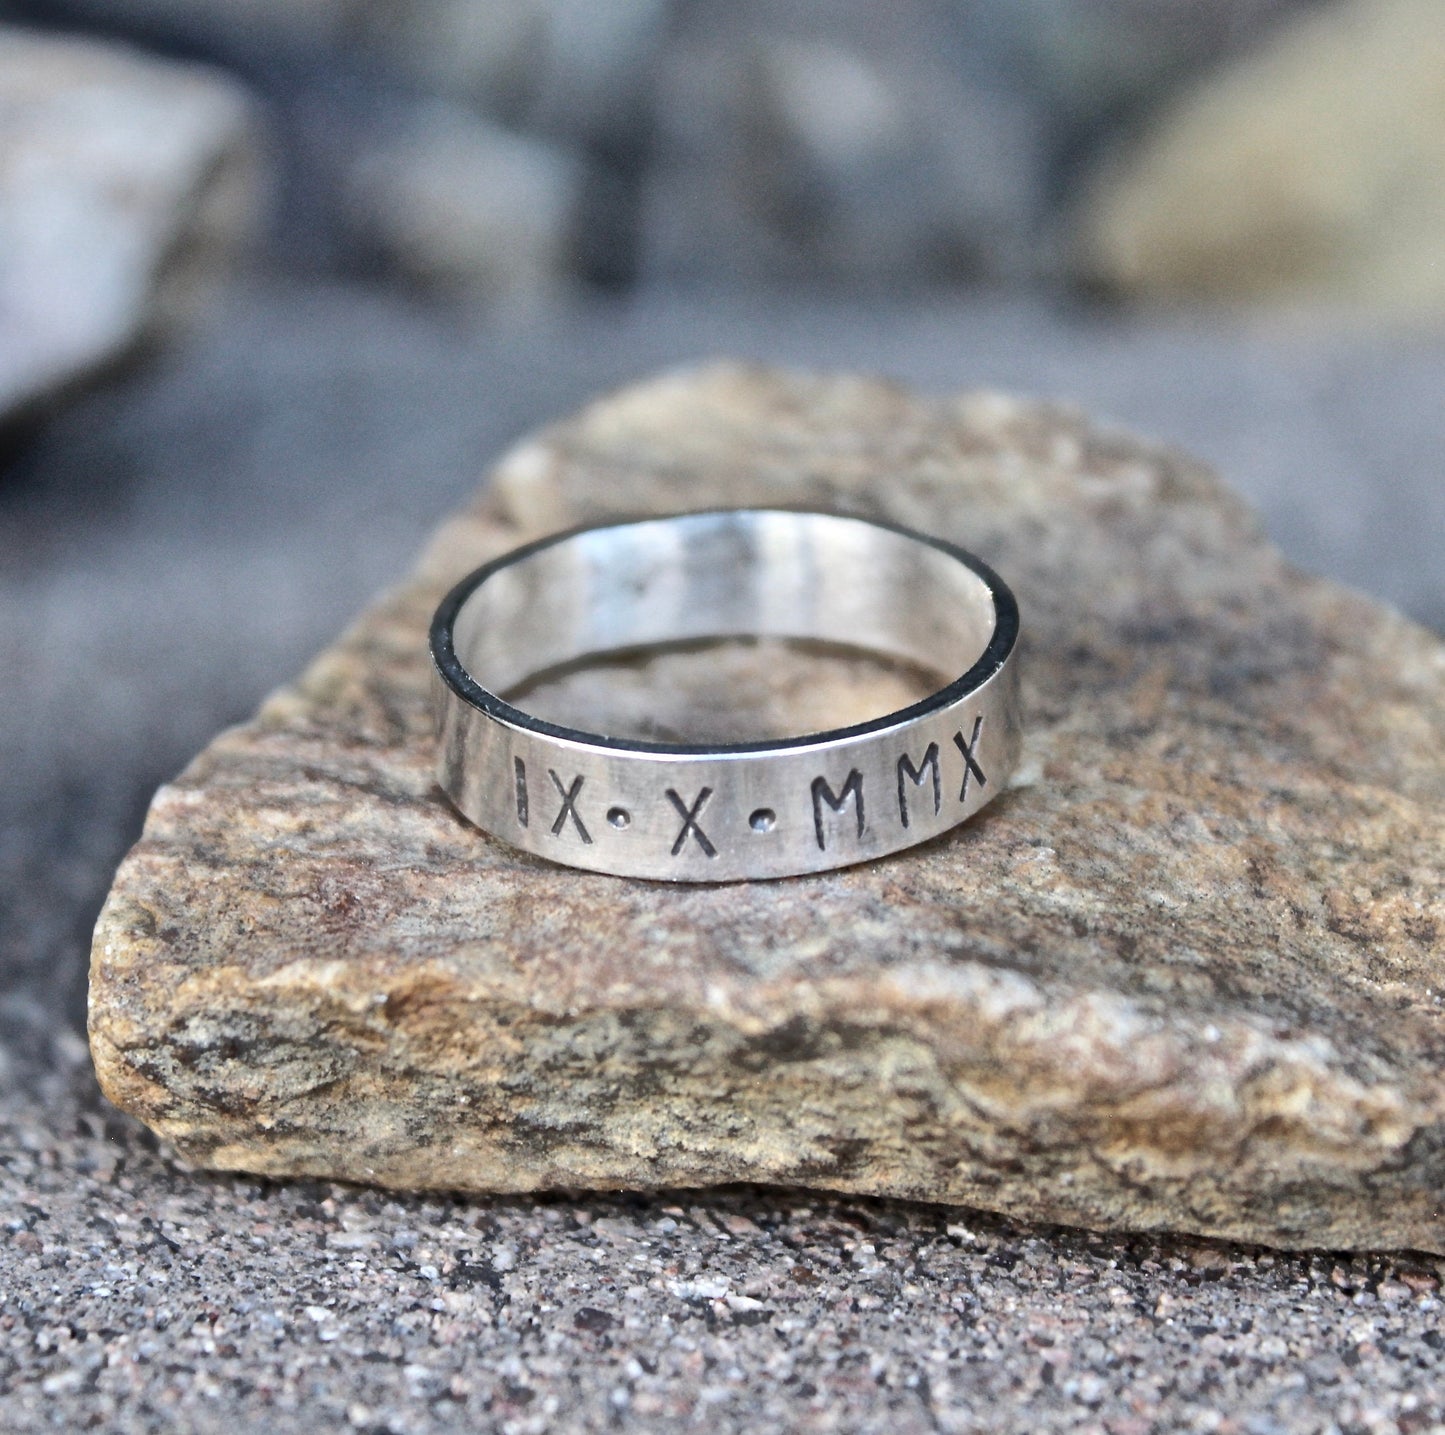 Men's Roman Numeral Date Ring, Sterling Silver Roman Numeral Date Ring, Anniversary Ring for Men, Men's Anniversary Ring, Gift for Husband